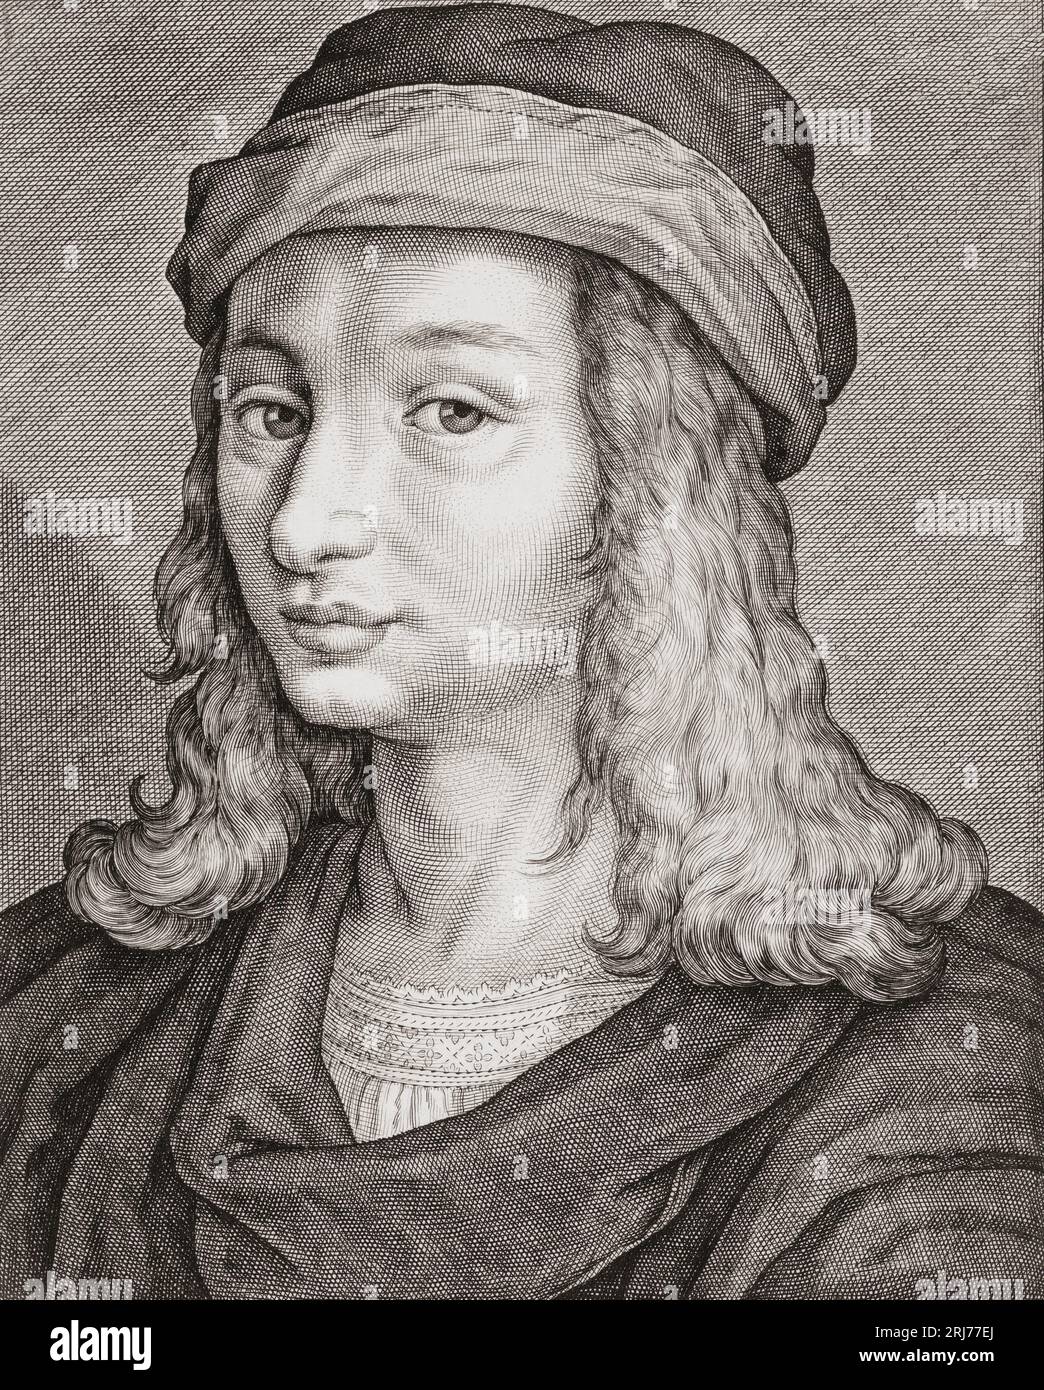 Raffaello Sanzio da Urbino, commonly known as Raphael, 1483 - 1520.  Italian artist and architect.  From an engraving by Jacob Matham after a self-portrait of Raphael. Stock Photo